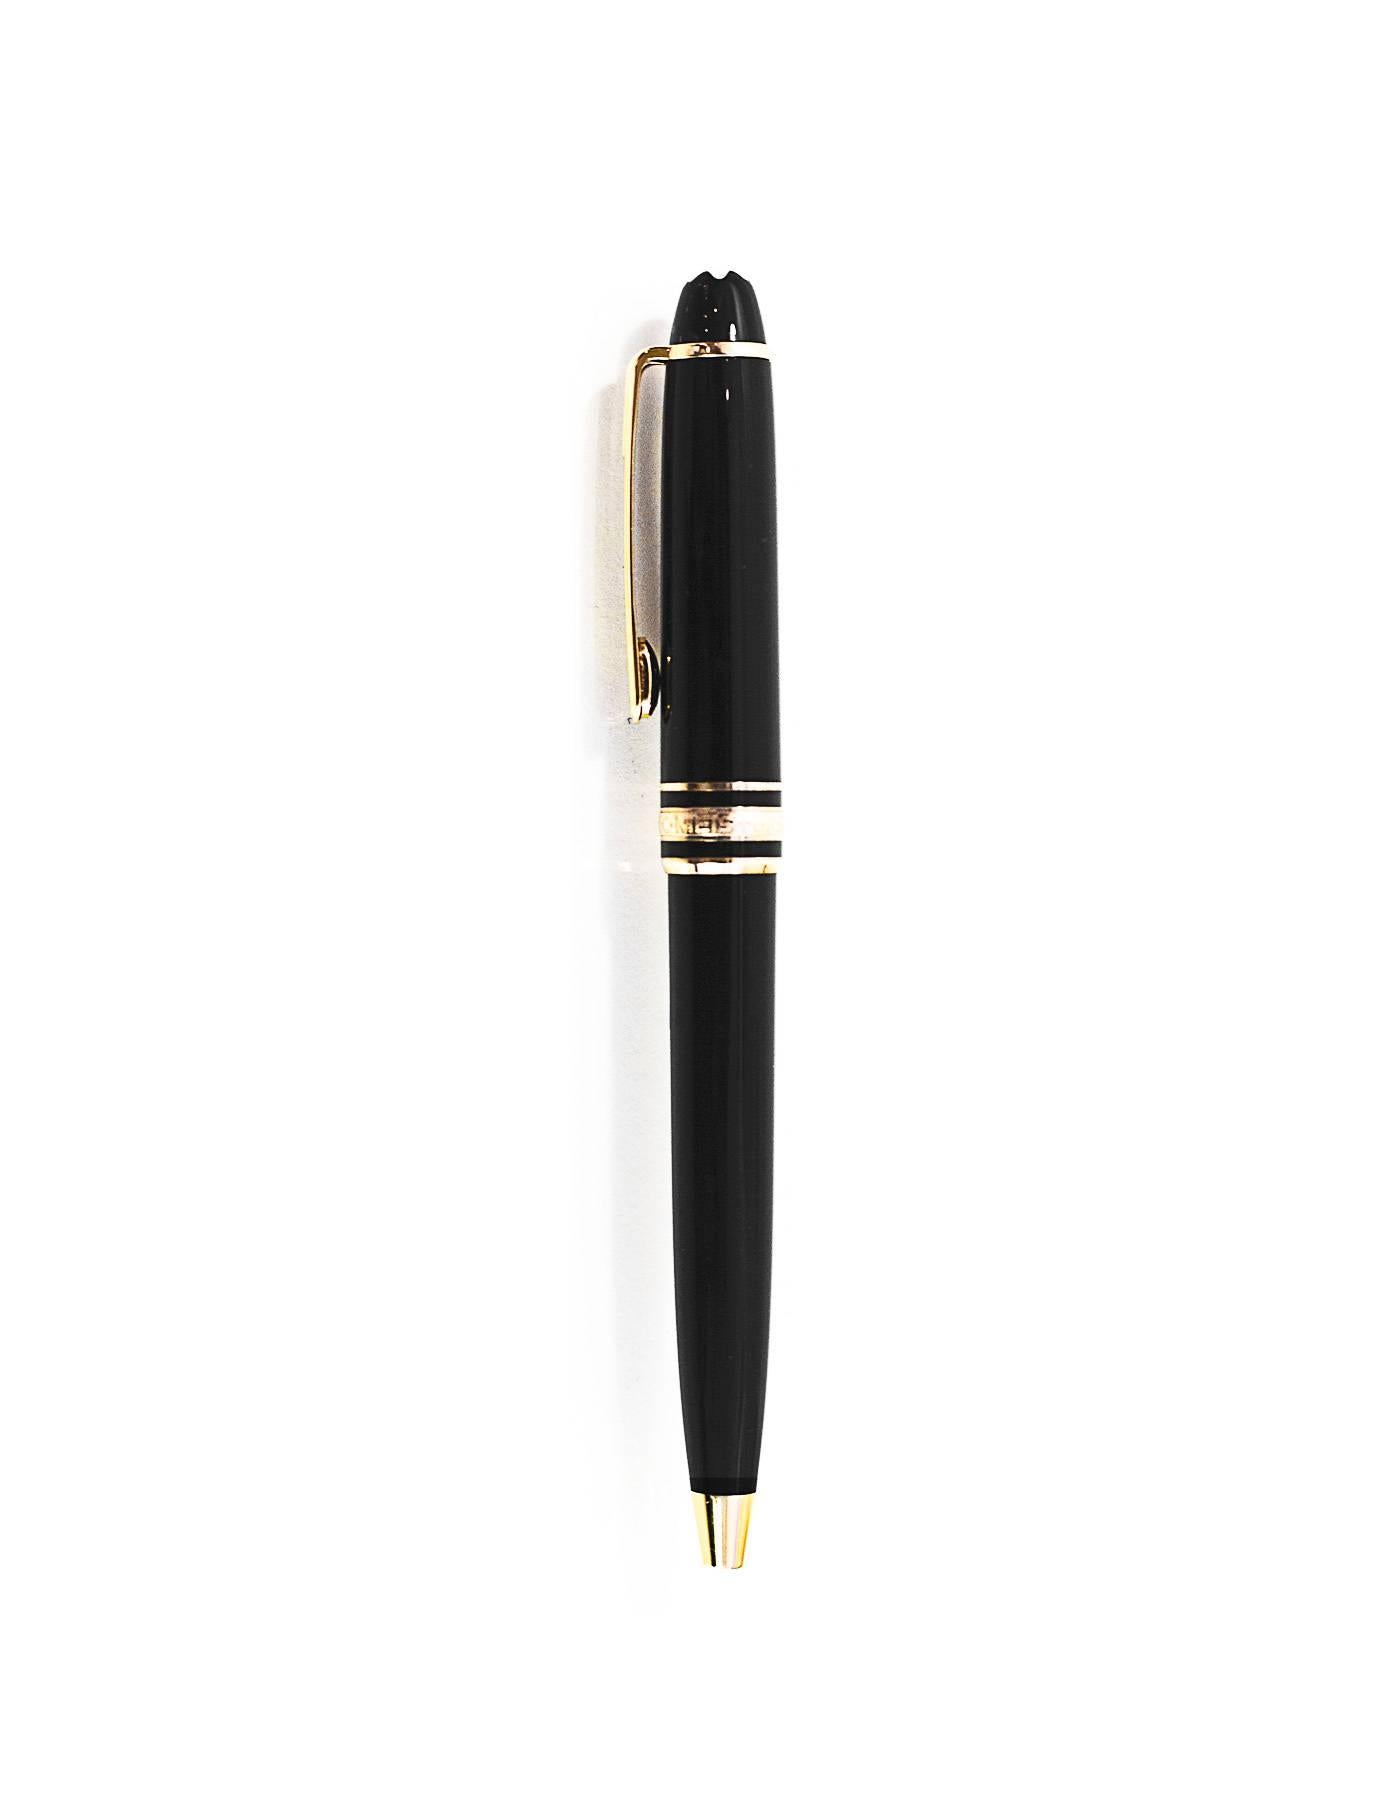 Mont Blanc Small Meisterstuck Hommage a W.A. Mozart Ballpoint Pen 
Features gold coated detailing

Color: Black, gold and white
Materials: Enamel, resin and metal
Retail Price: $395 + tax
Overall Condition: Excellent pre-owned condition 
Includes: